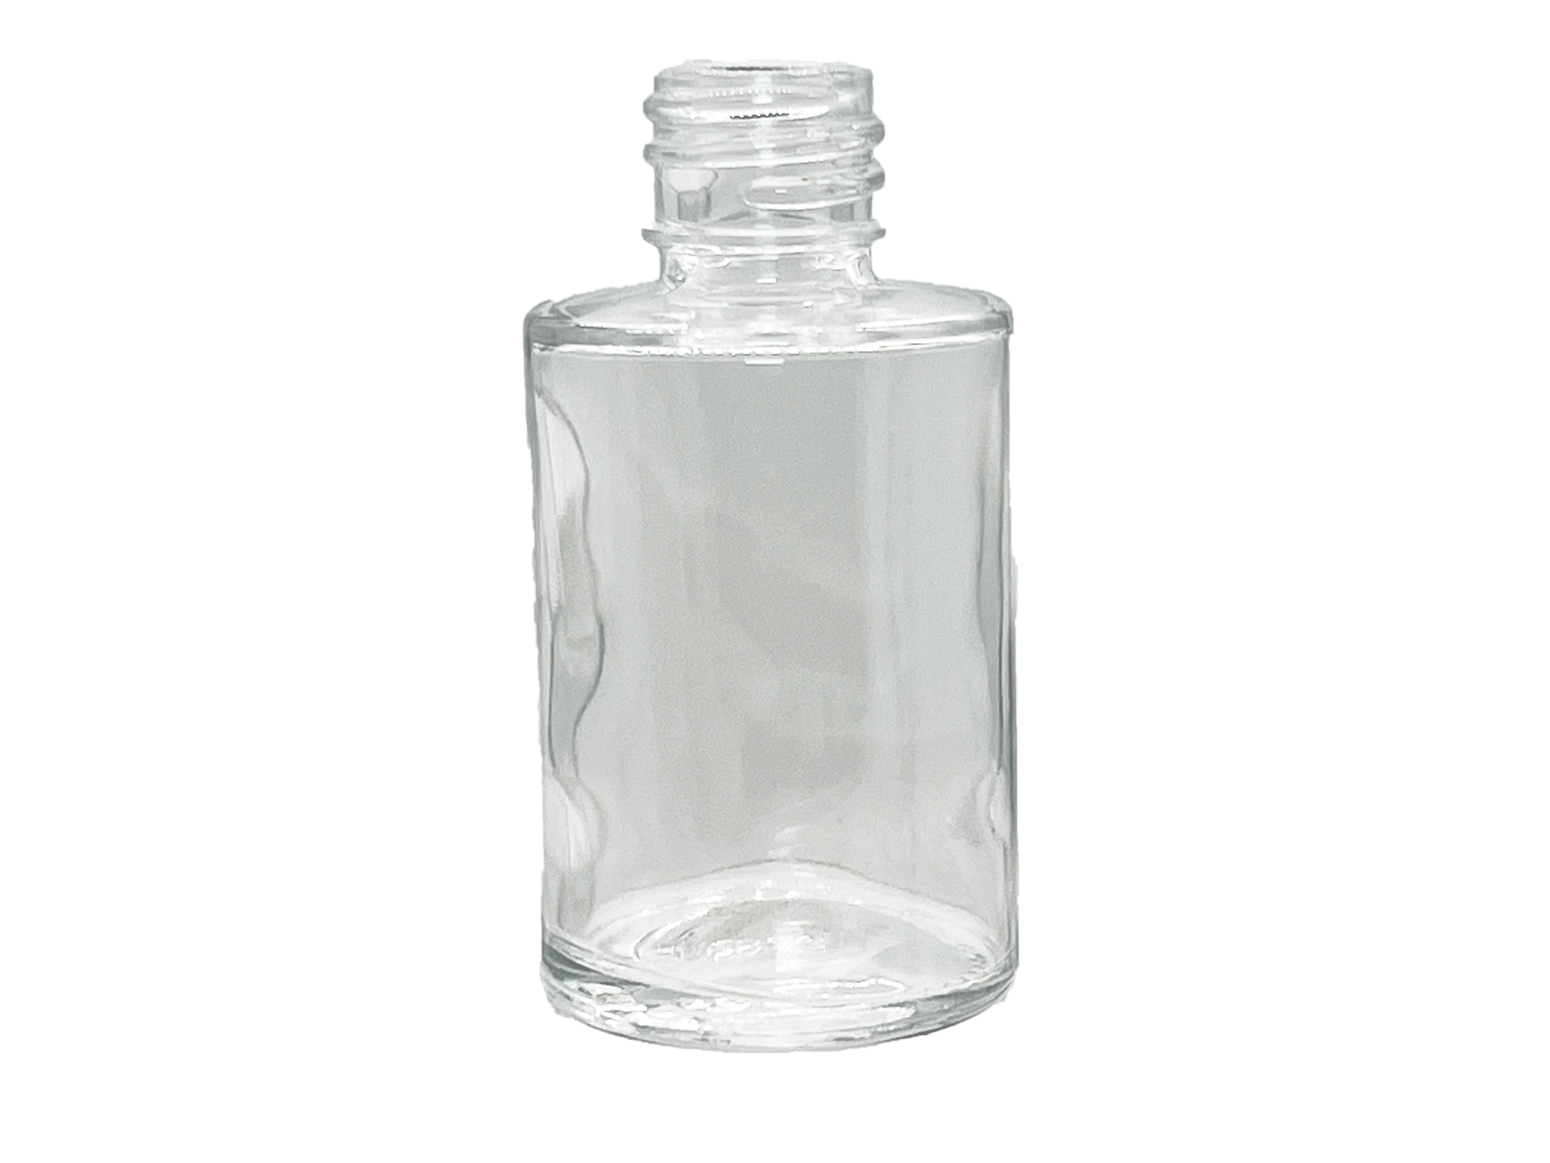 Glass Containers for sale in San Francisco, California